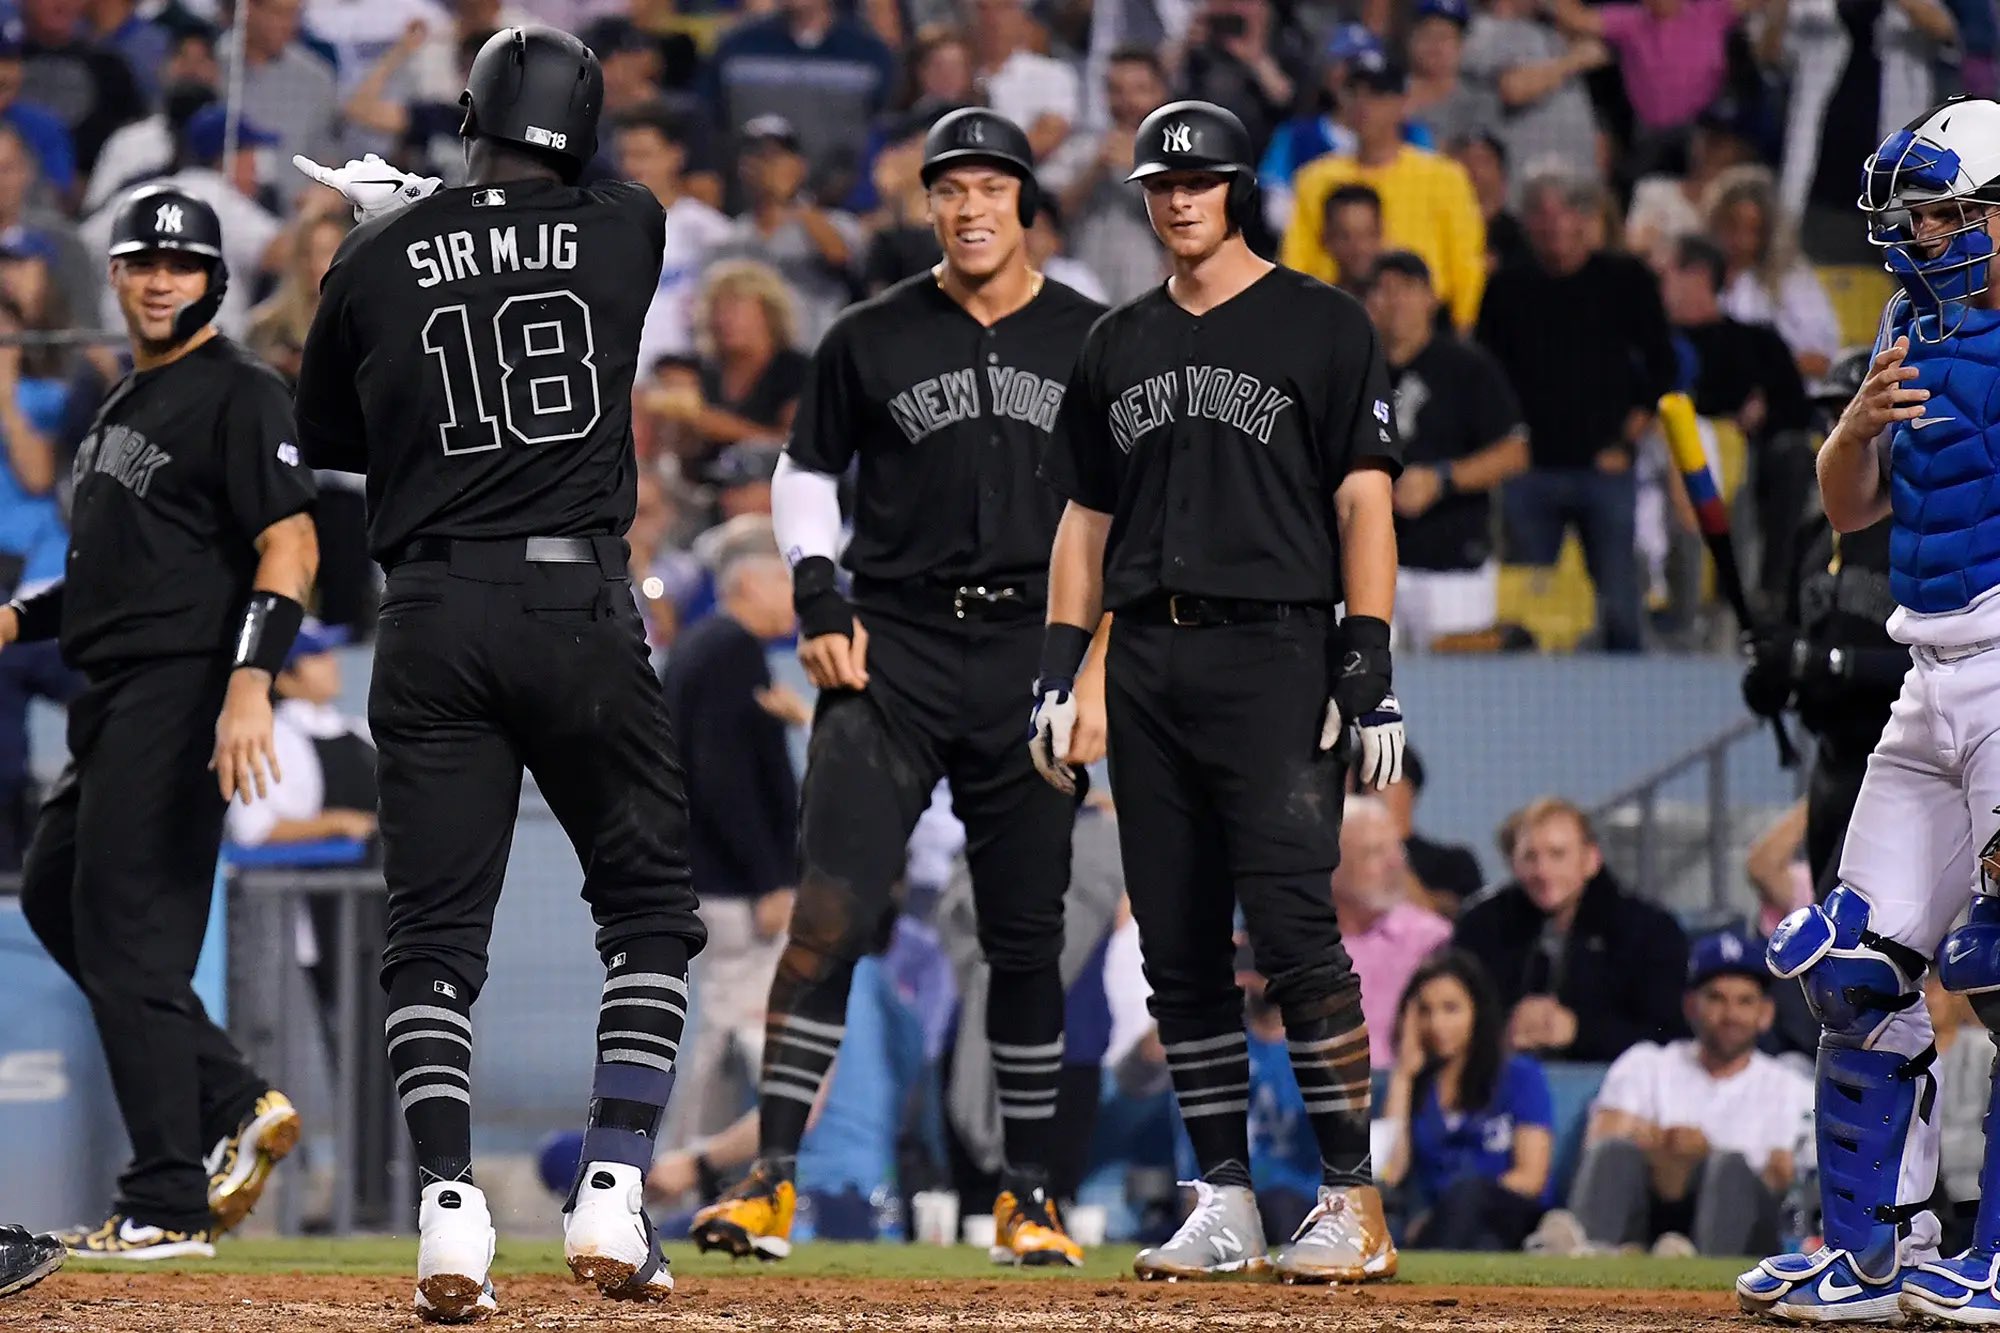 Dom on X: Make these the Yankees' city connect jerseys imo https